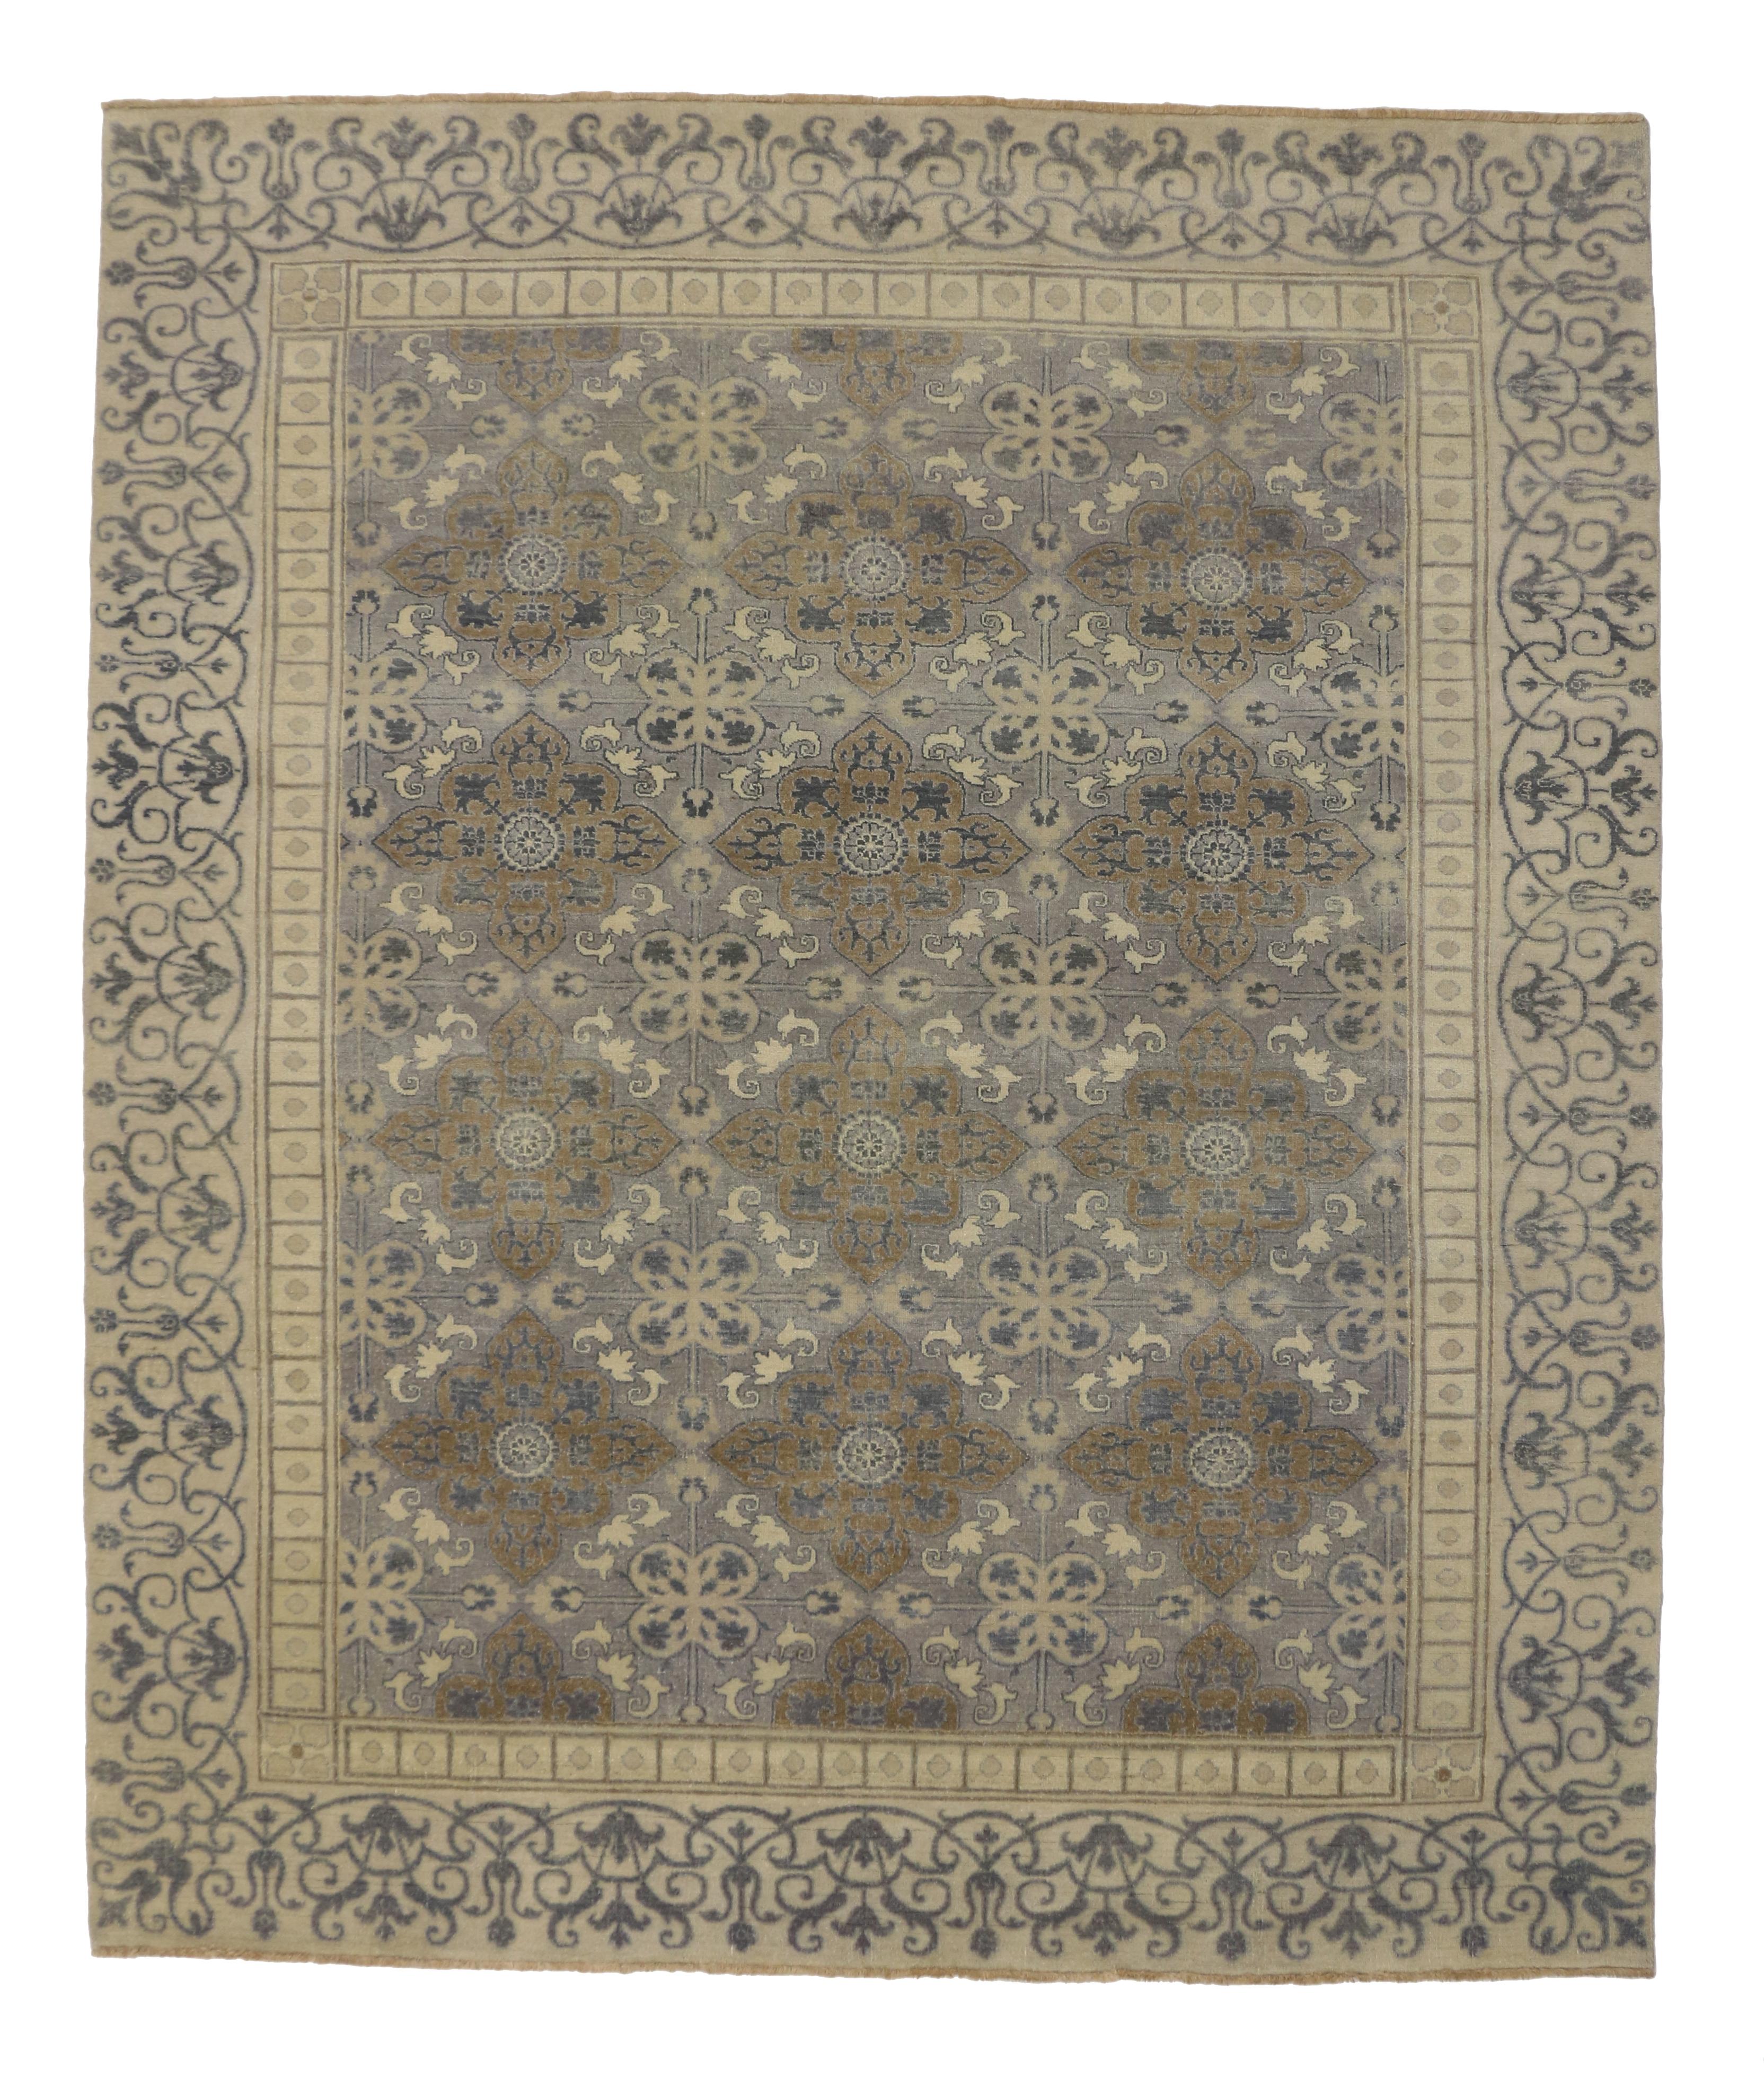 Contemporary New Transitional Area Rug with Khotan Pattern and Modernist Neoclassic Style For Sale